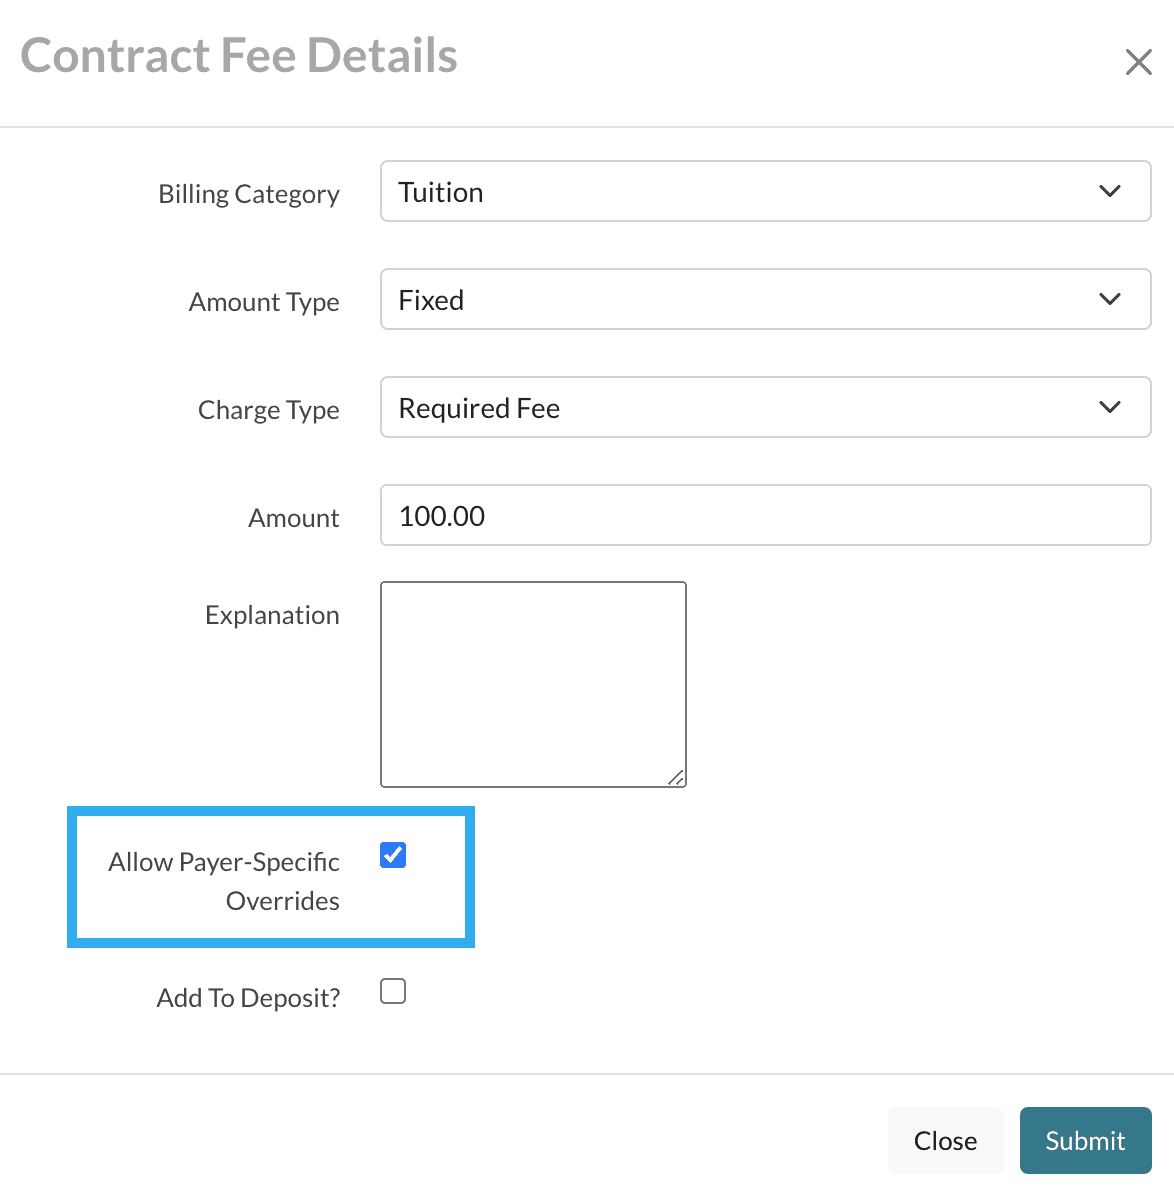 contract fee details dialogue box showing the Payer Specific Override checkbox.